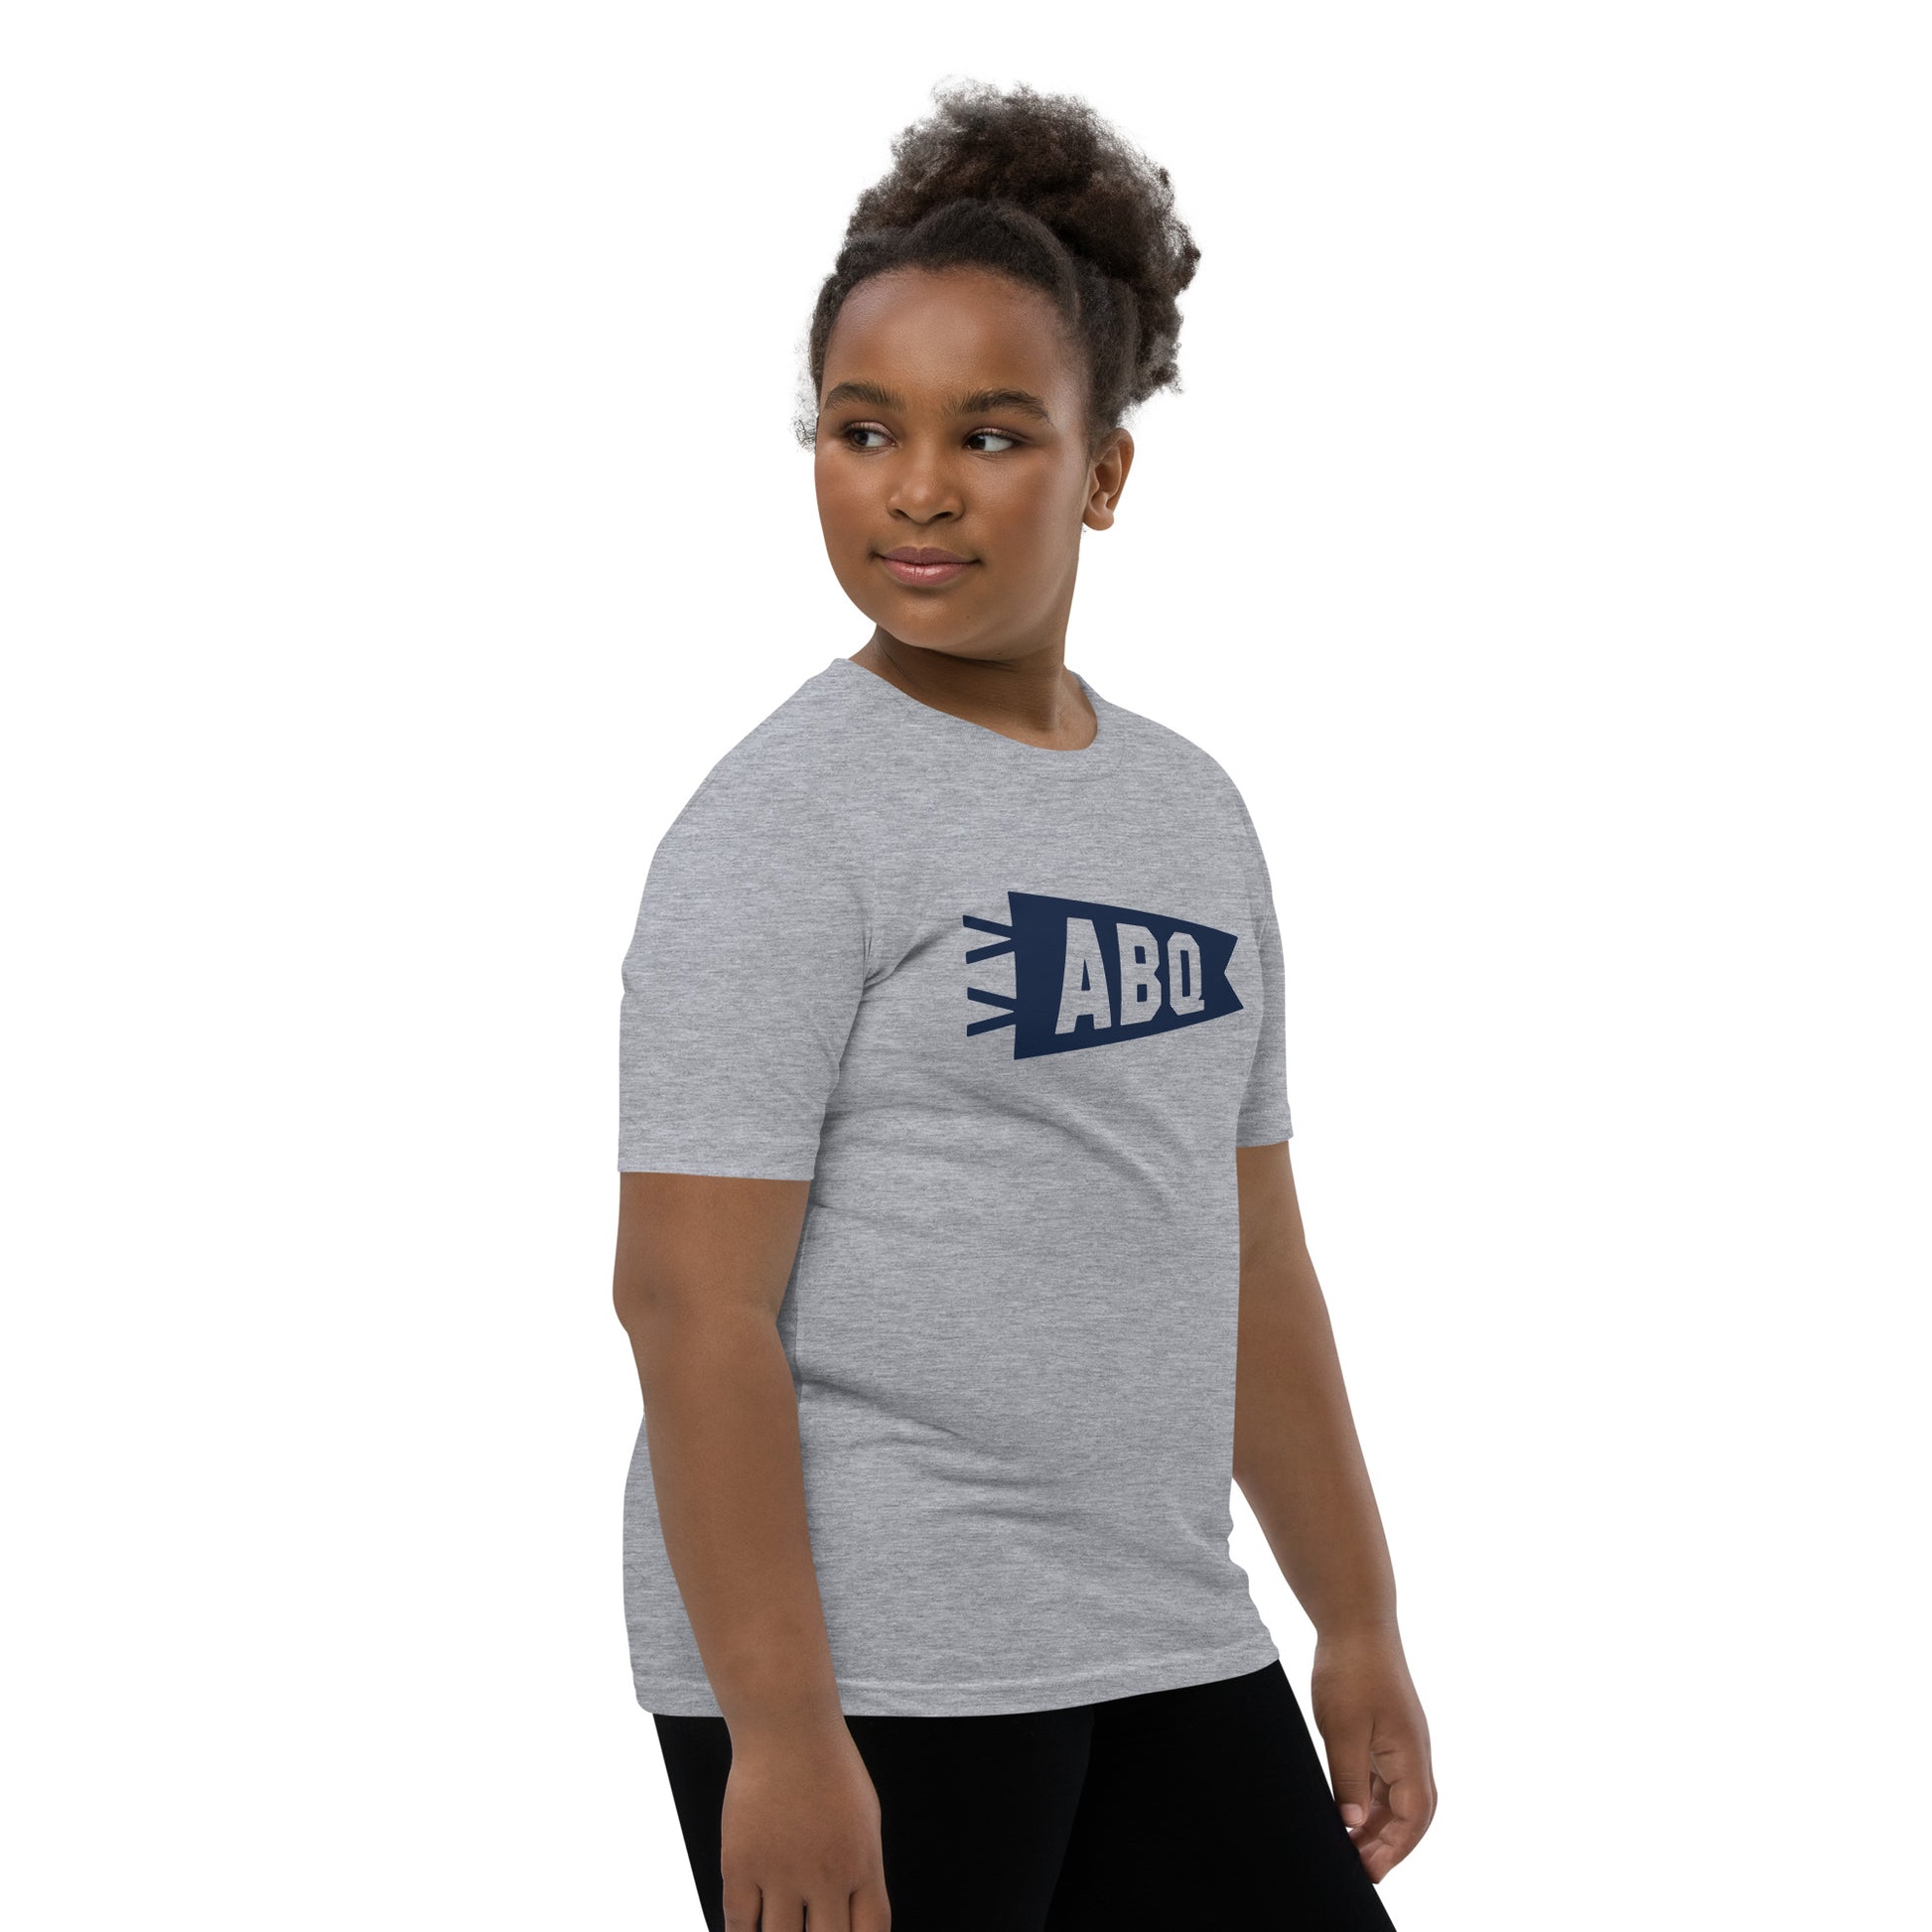 Kid's Airport Code Tee - Navy Blue Graphic • ABQ Albuquerque • YHM Designs - Image 03